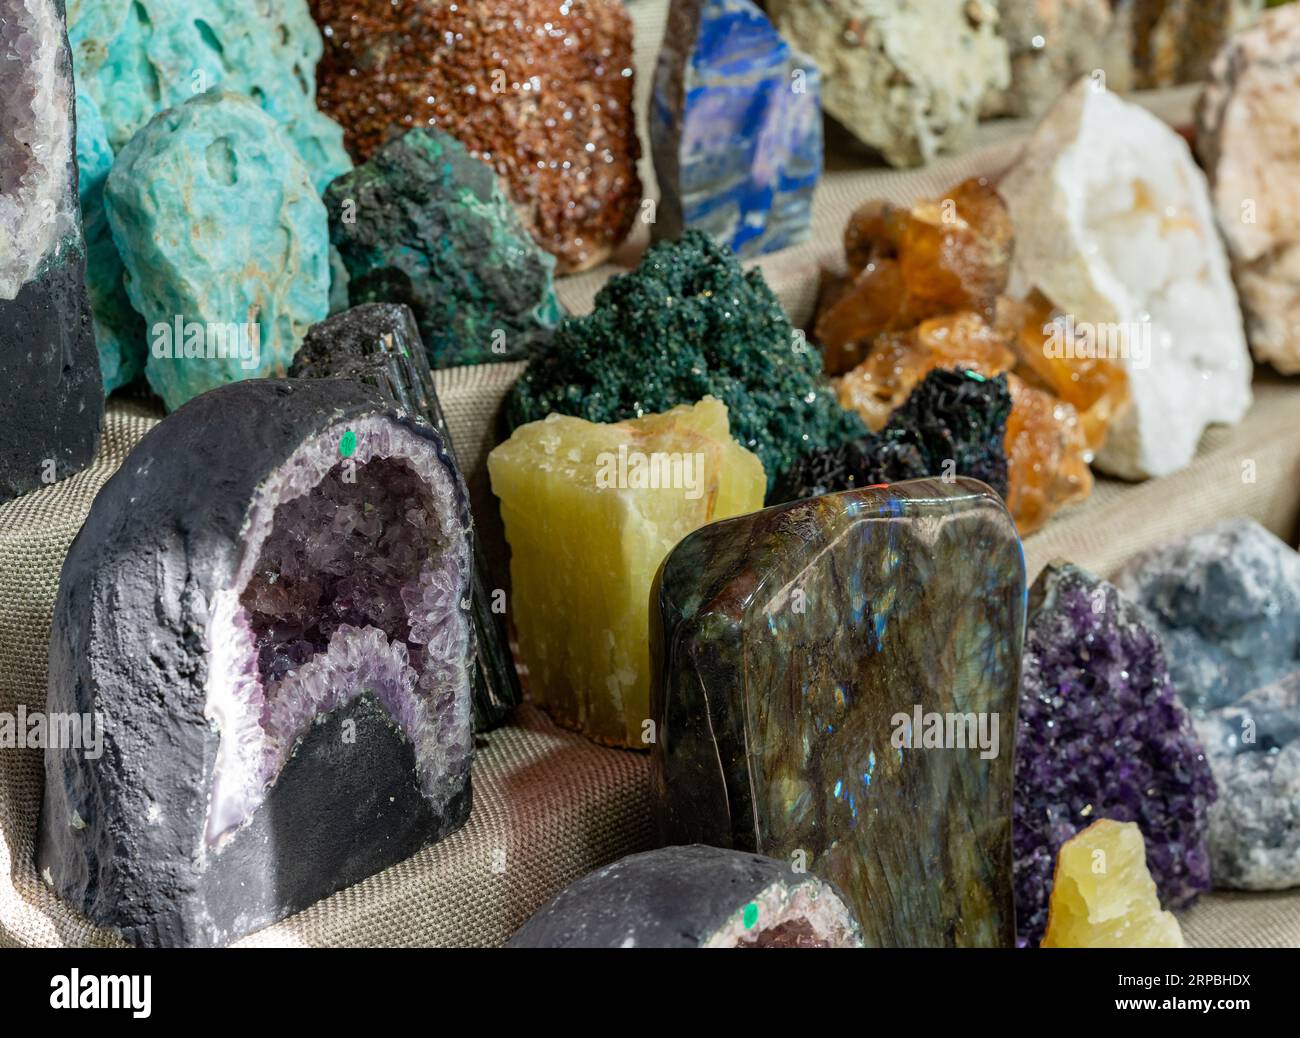 Minerals and gemstones for sale at a market Stock Photo